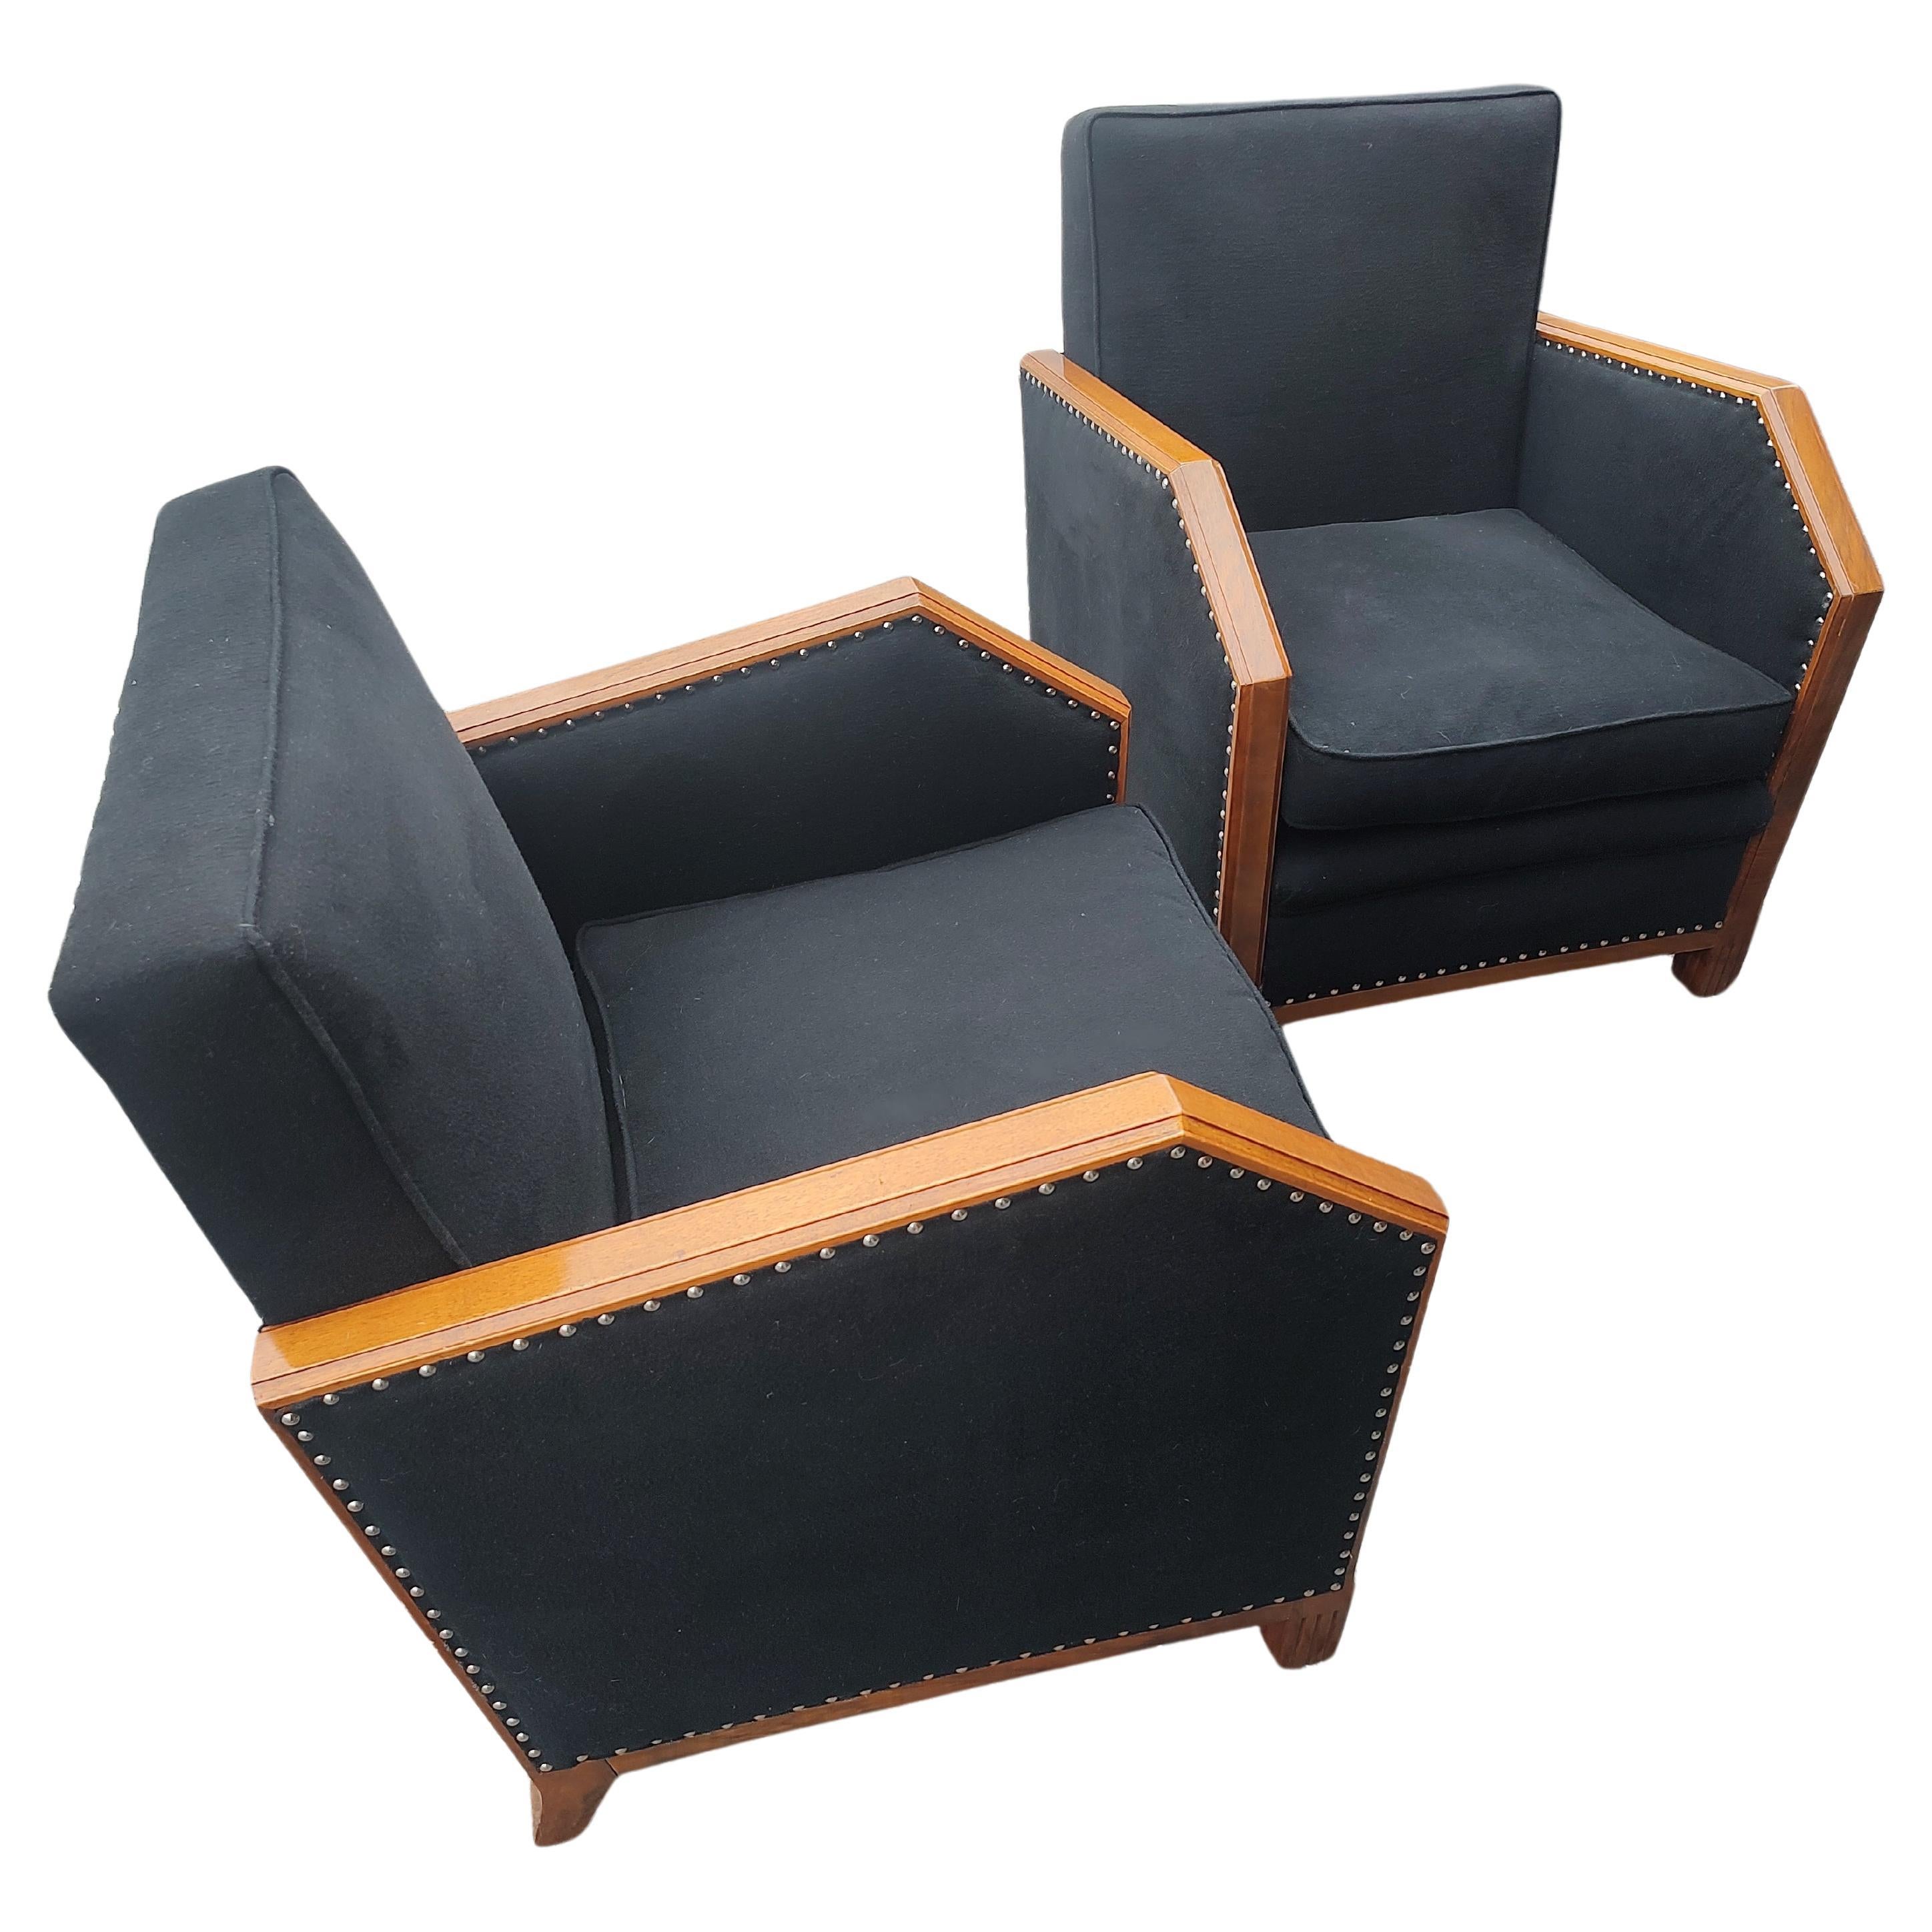 Pair of Rosewood Art Deco Club Chairs with Felt Upholstery & Brass Tacks C1935 For Sale 7